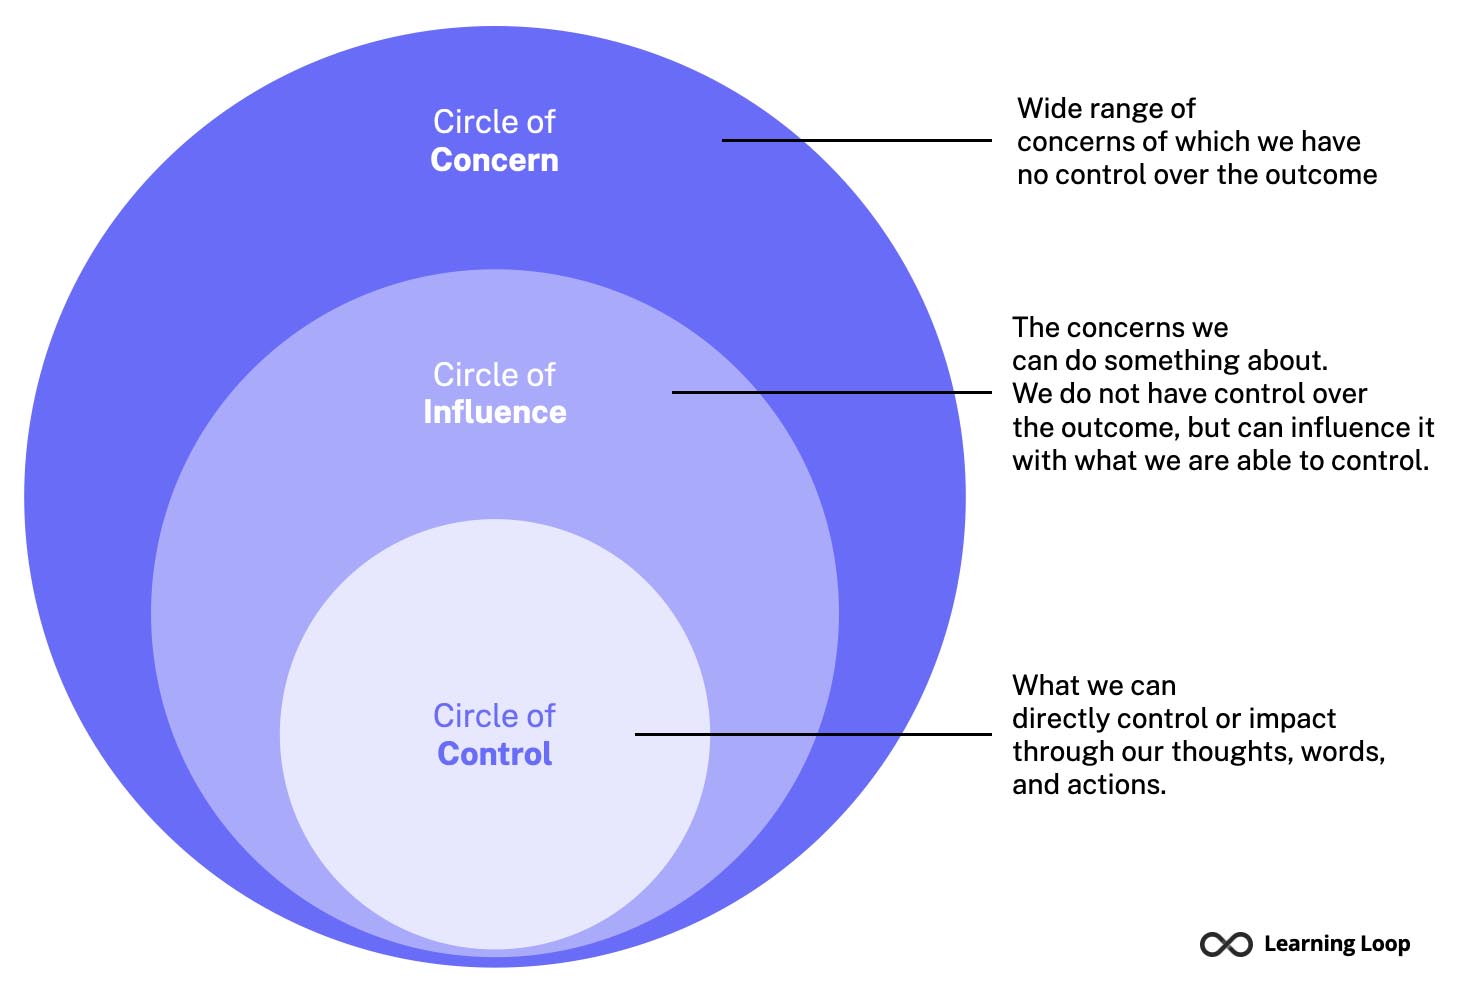 The Circle of Control, The Circle of Influence, and The Circle of Concern - as explained by Stephen Covey